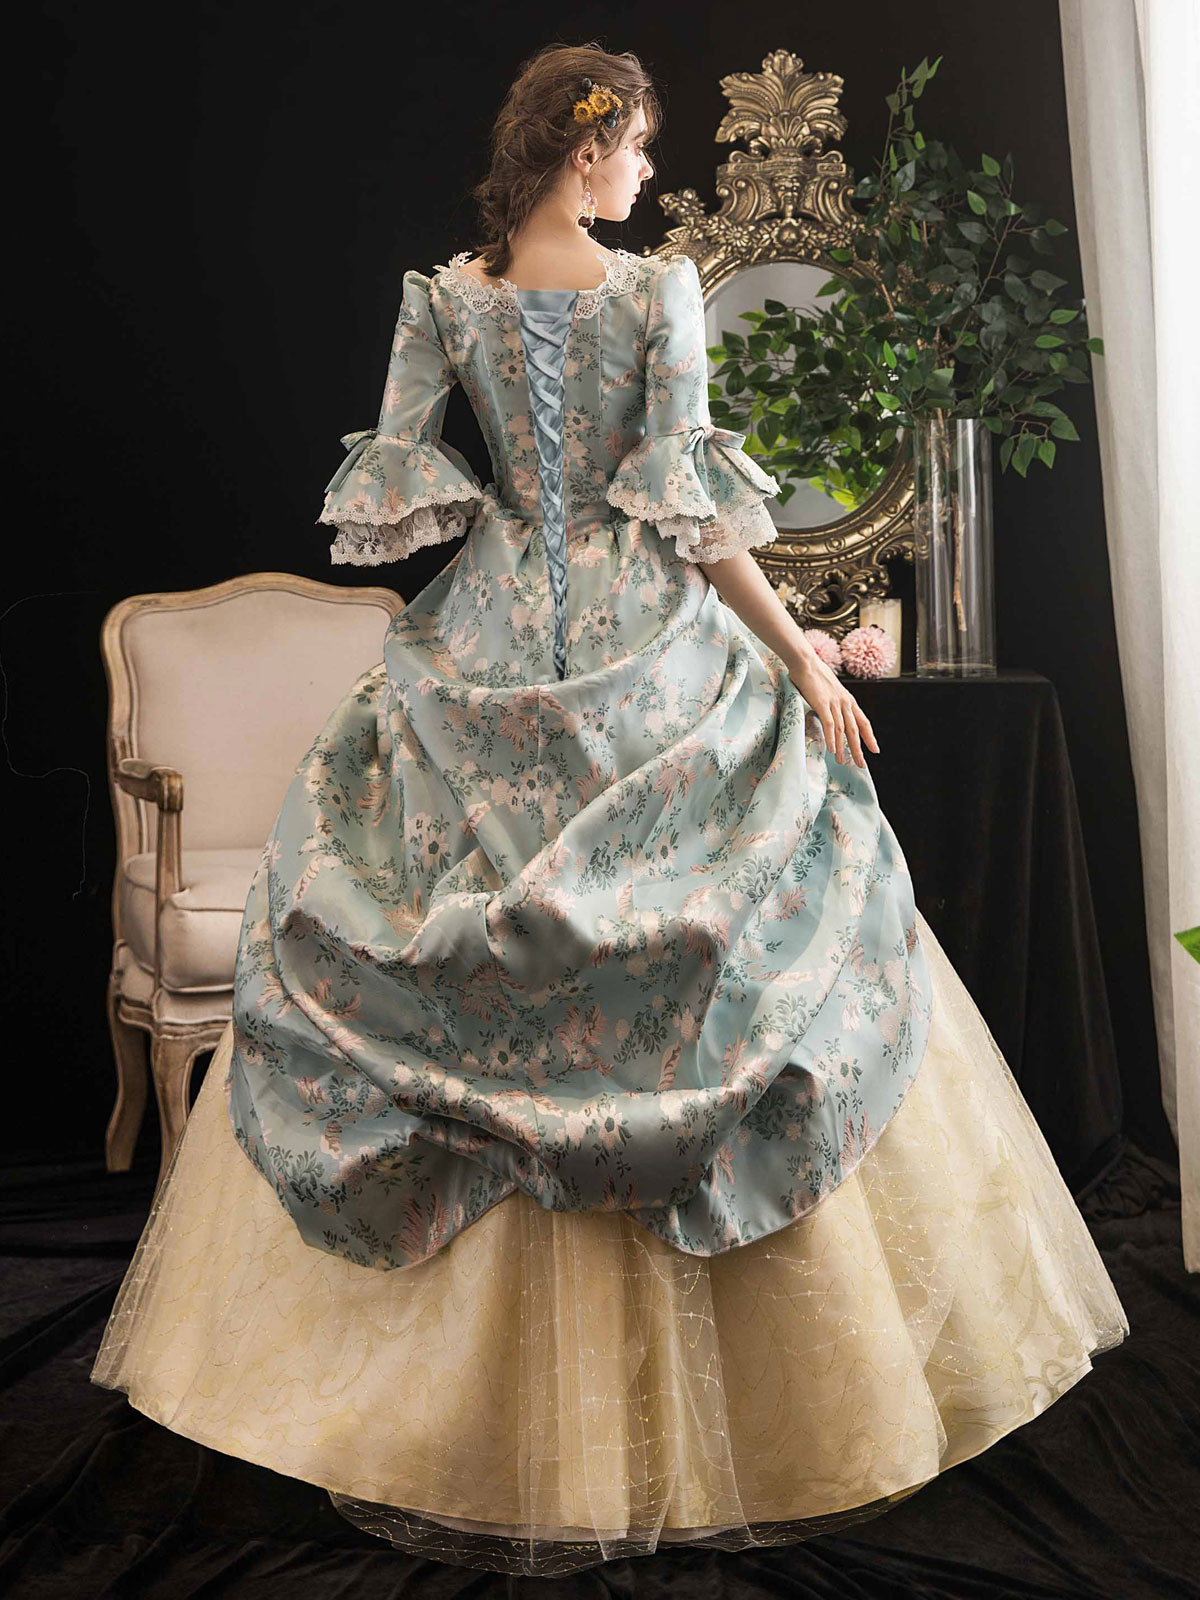 Details about   Victorian Lolita Prom Dress Southern Belle Ball Gown Reenactment Theater Costume 